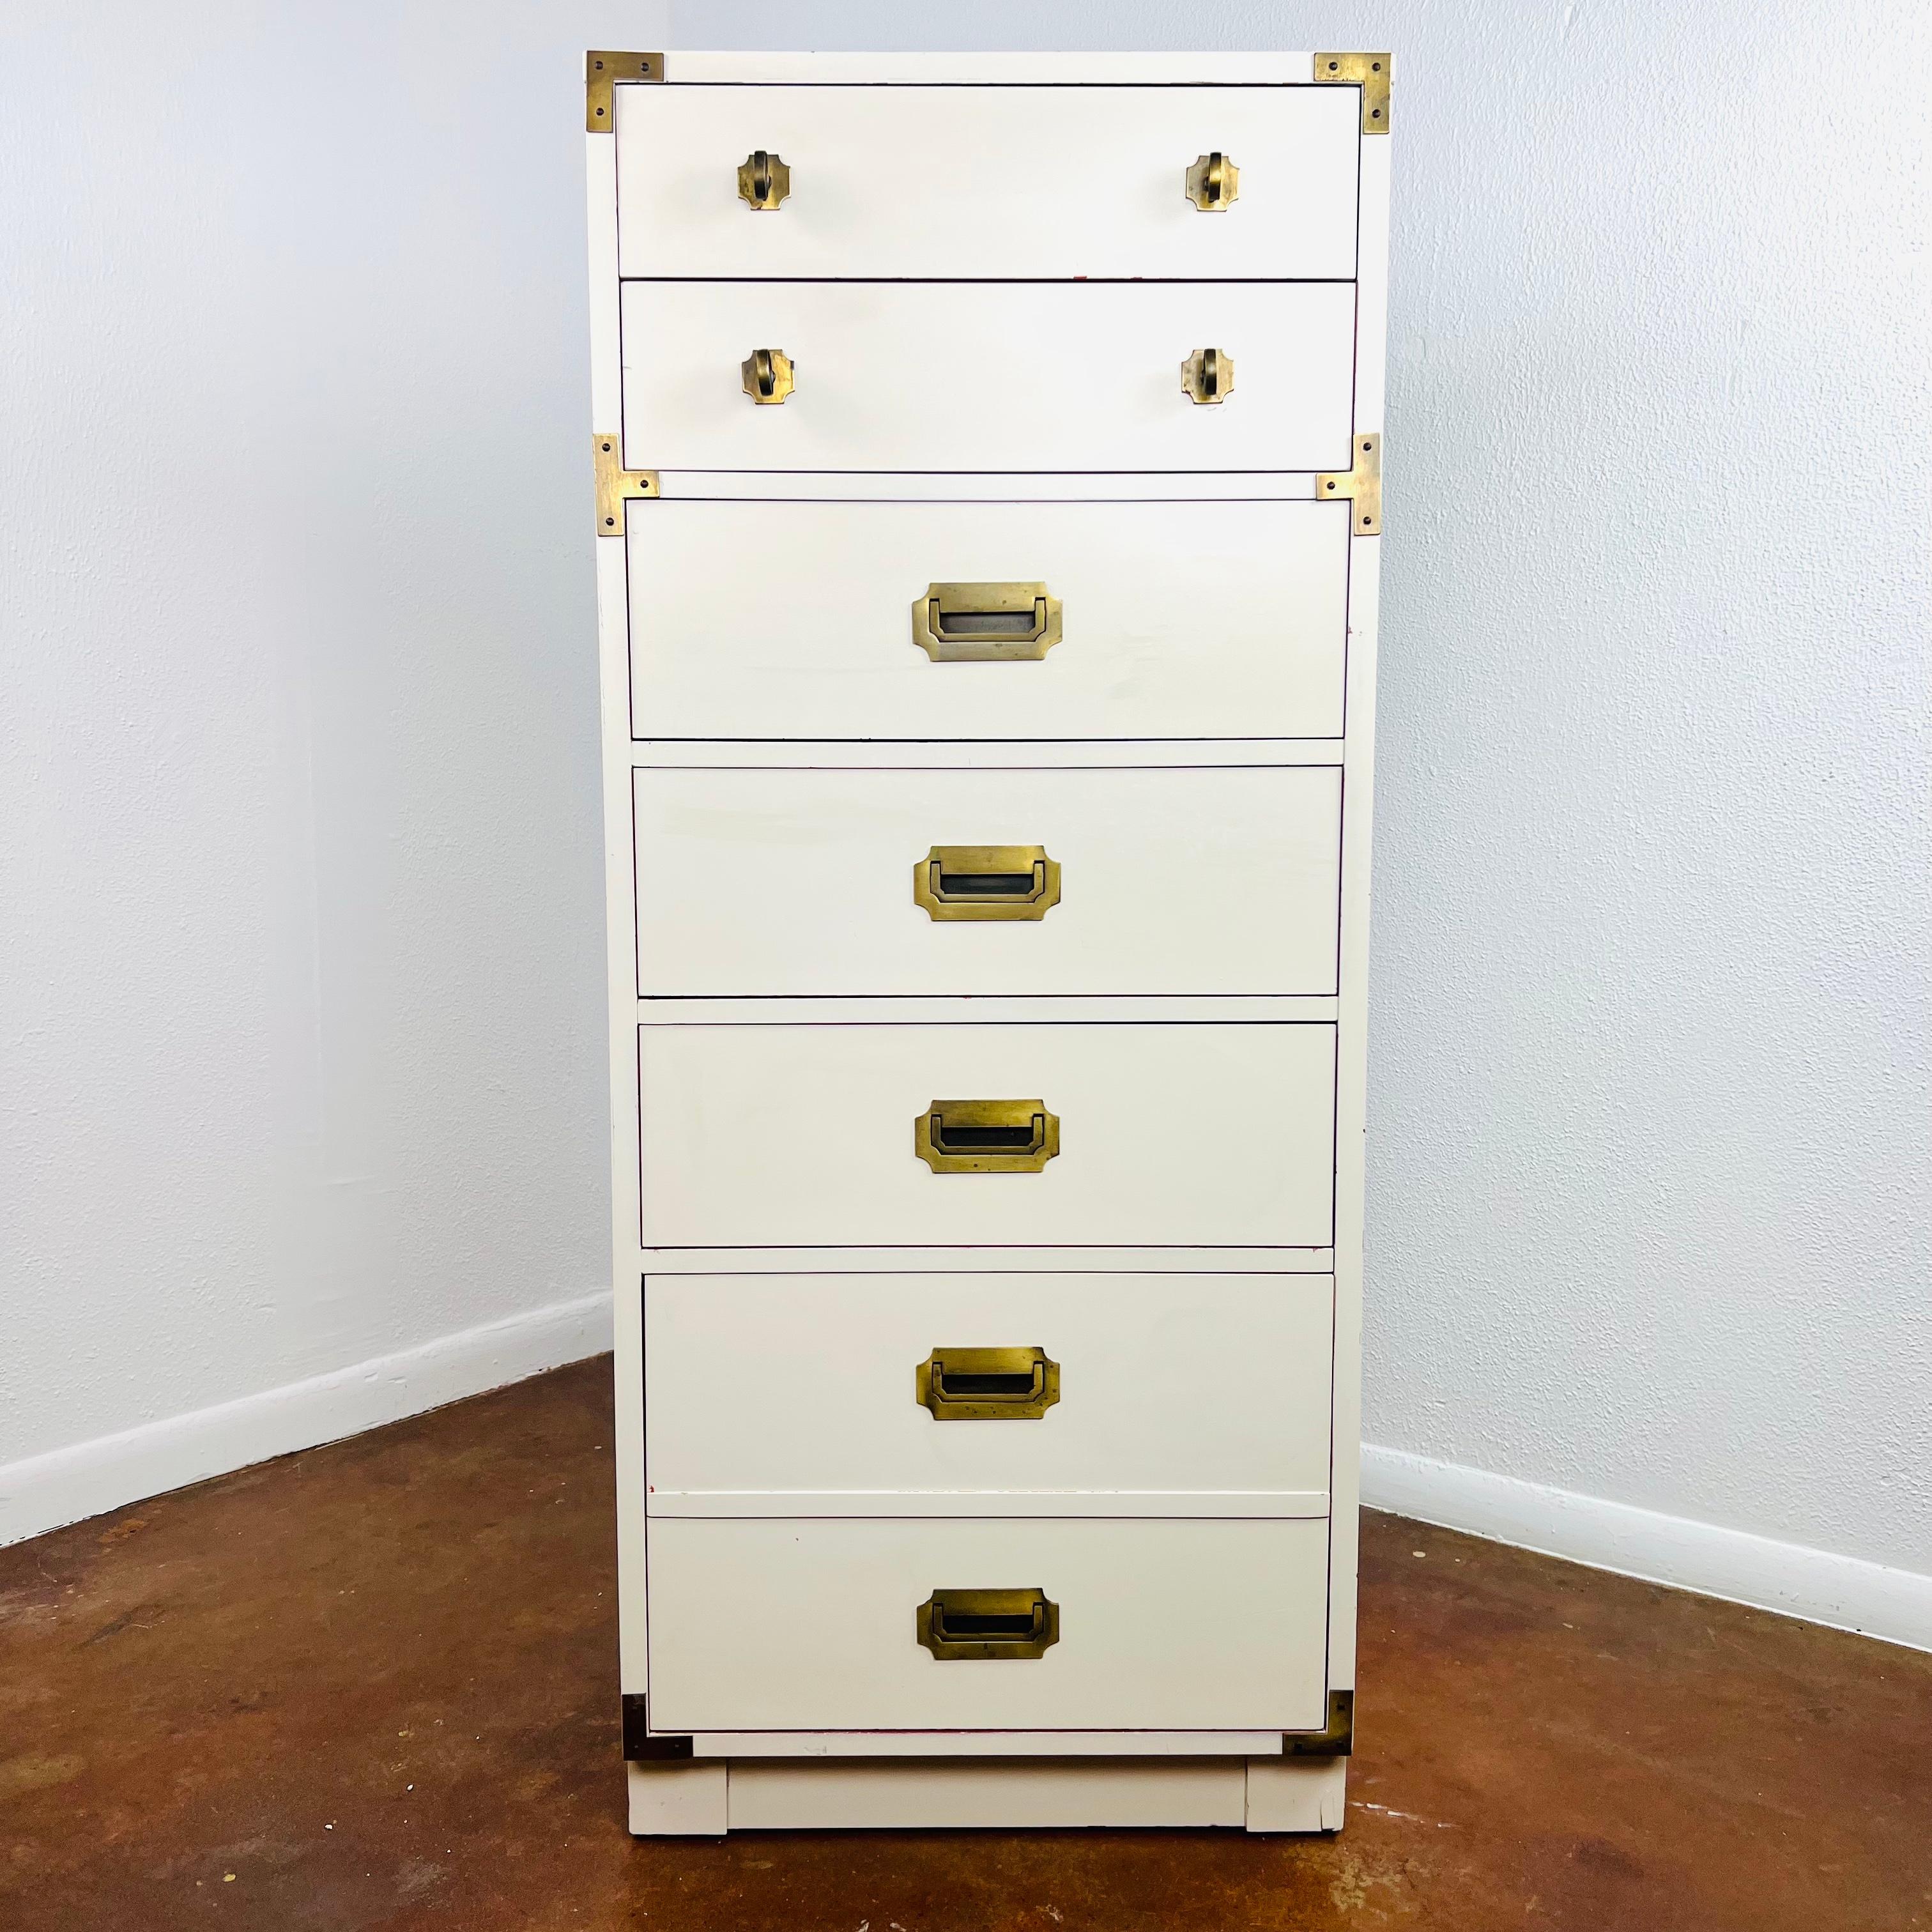 Fabulous and rare vintage campaign tall dresser/lingerie chest. Expertly crafted solid wood construction. 
Original brass accents and classic campaign hardware.
Space saving with 6 spacious storage drawers and ample storage.
Very fabulous and